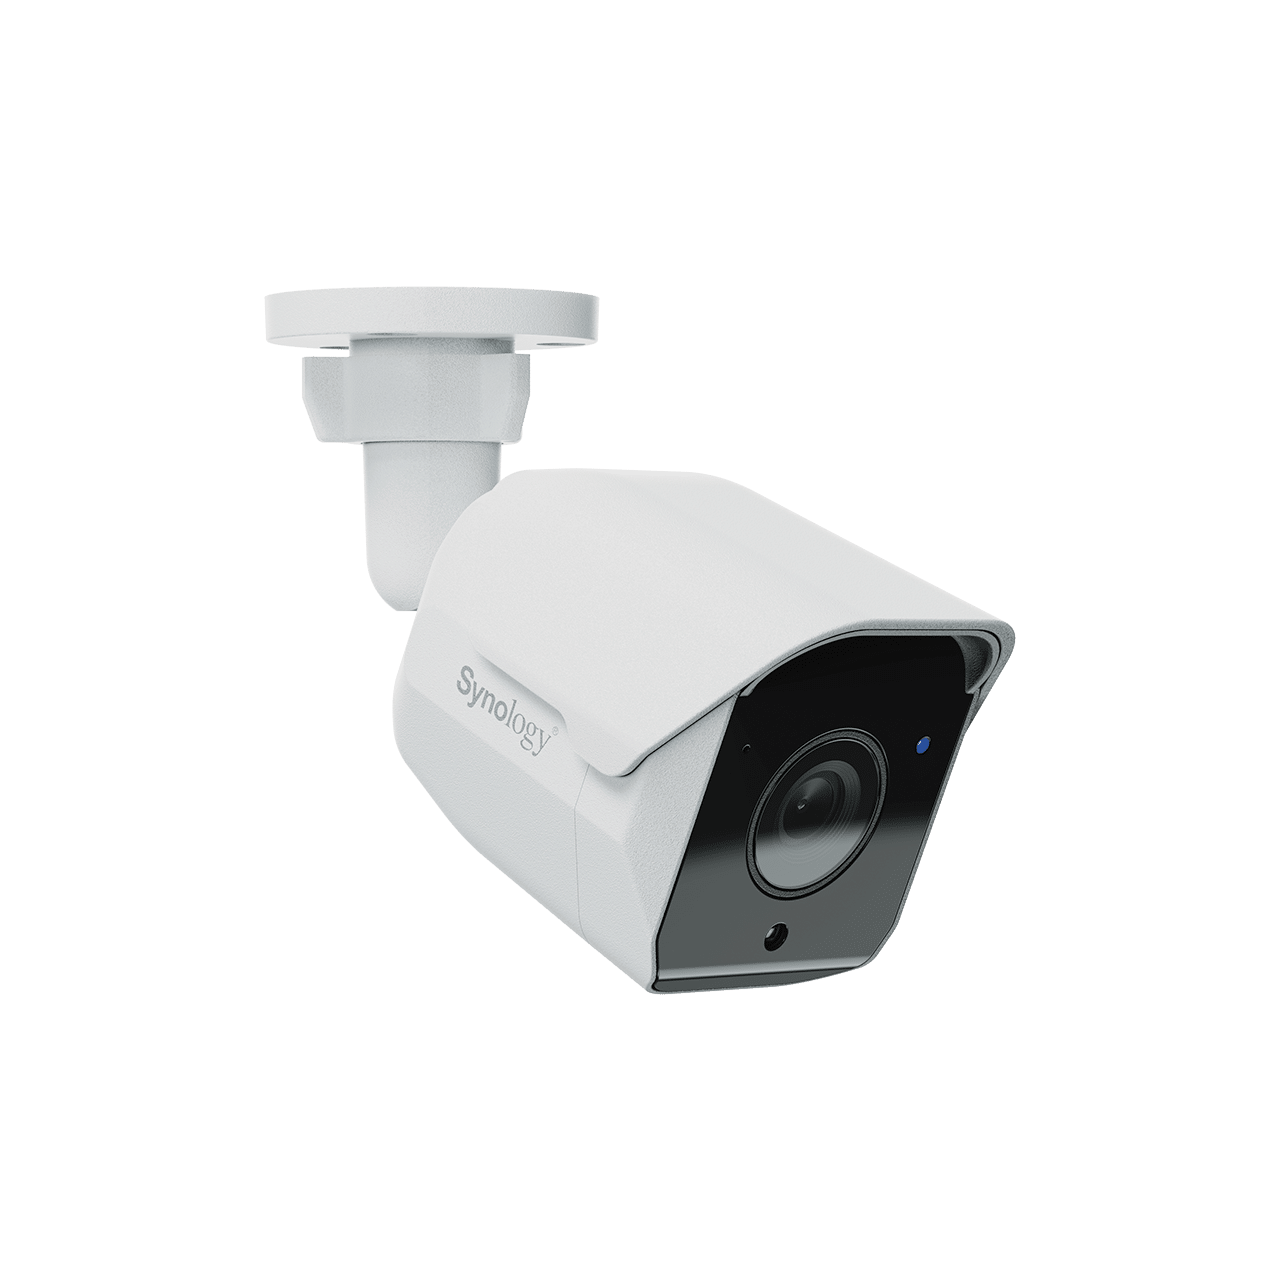 Synology Launches BC500 and TC500 Surveillance AI Cameras